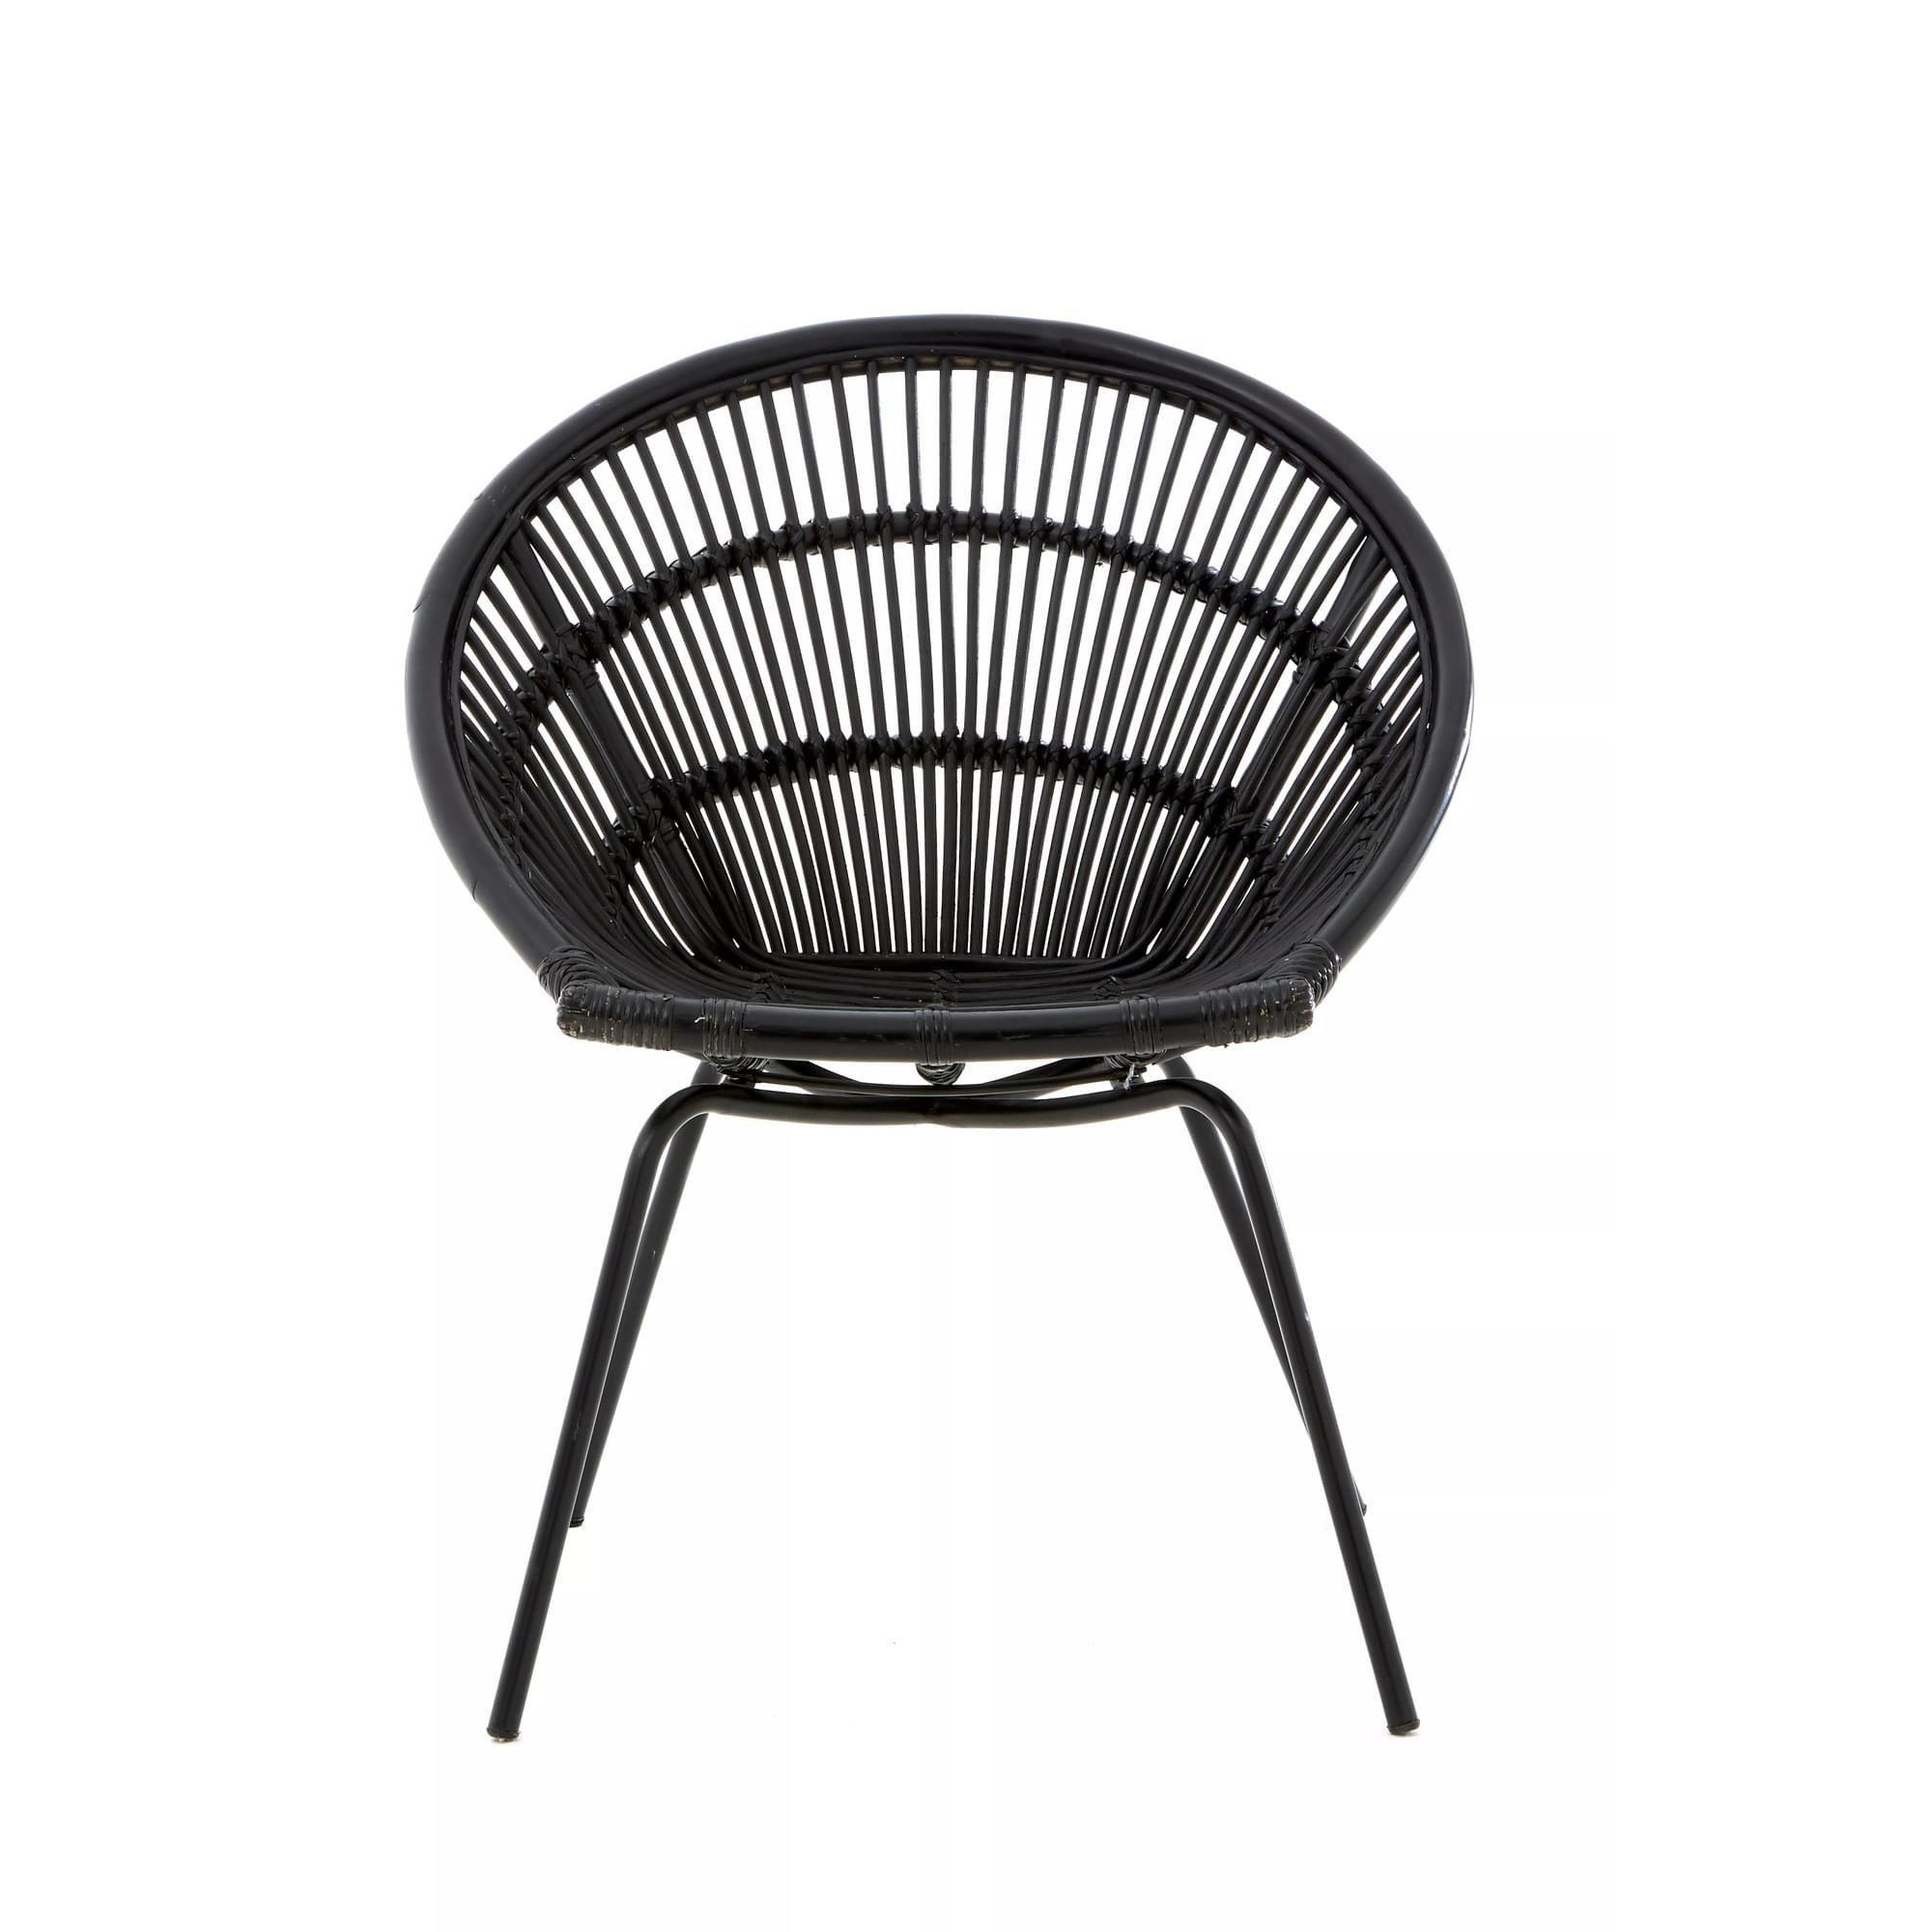 Interiors by Premier Black Washed Natural Rattan Chair, Rustless Rattan Chair, Easy Cleaning Rattan Armchair - image 1